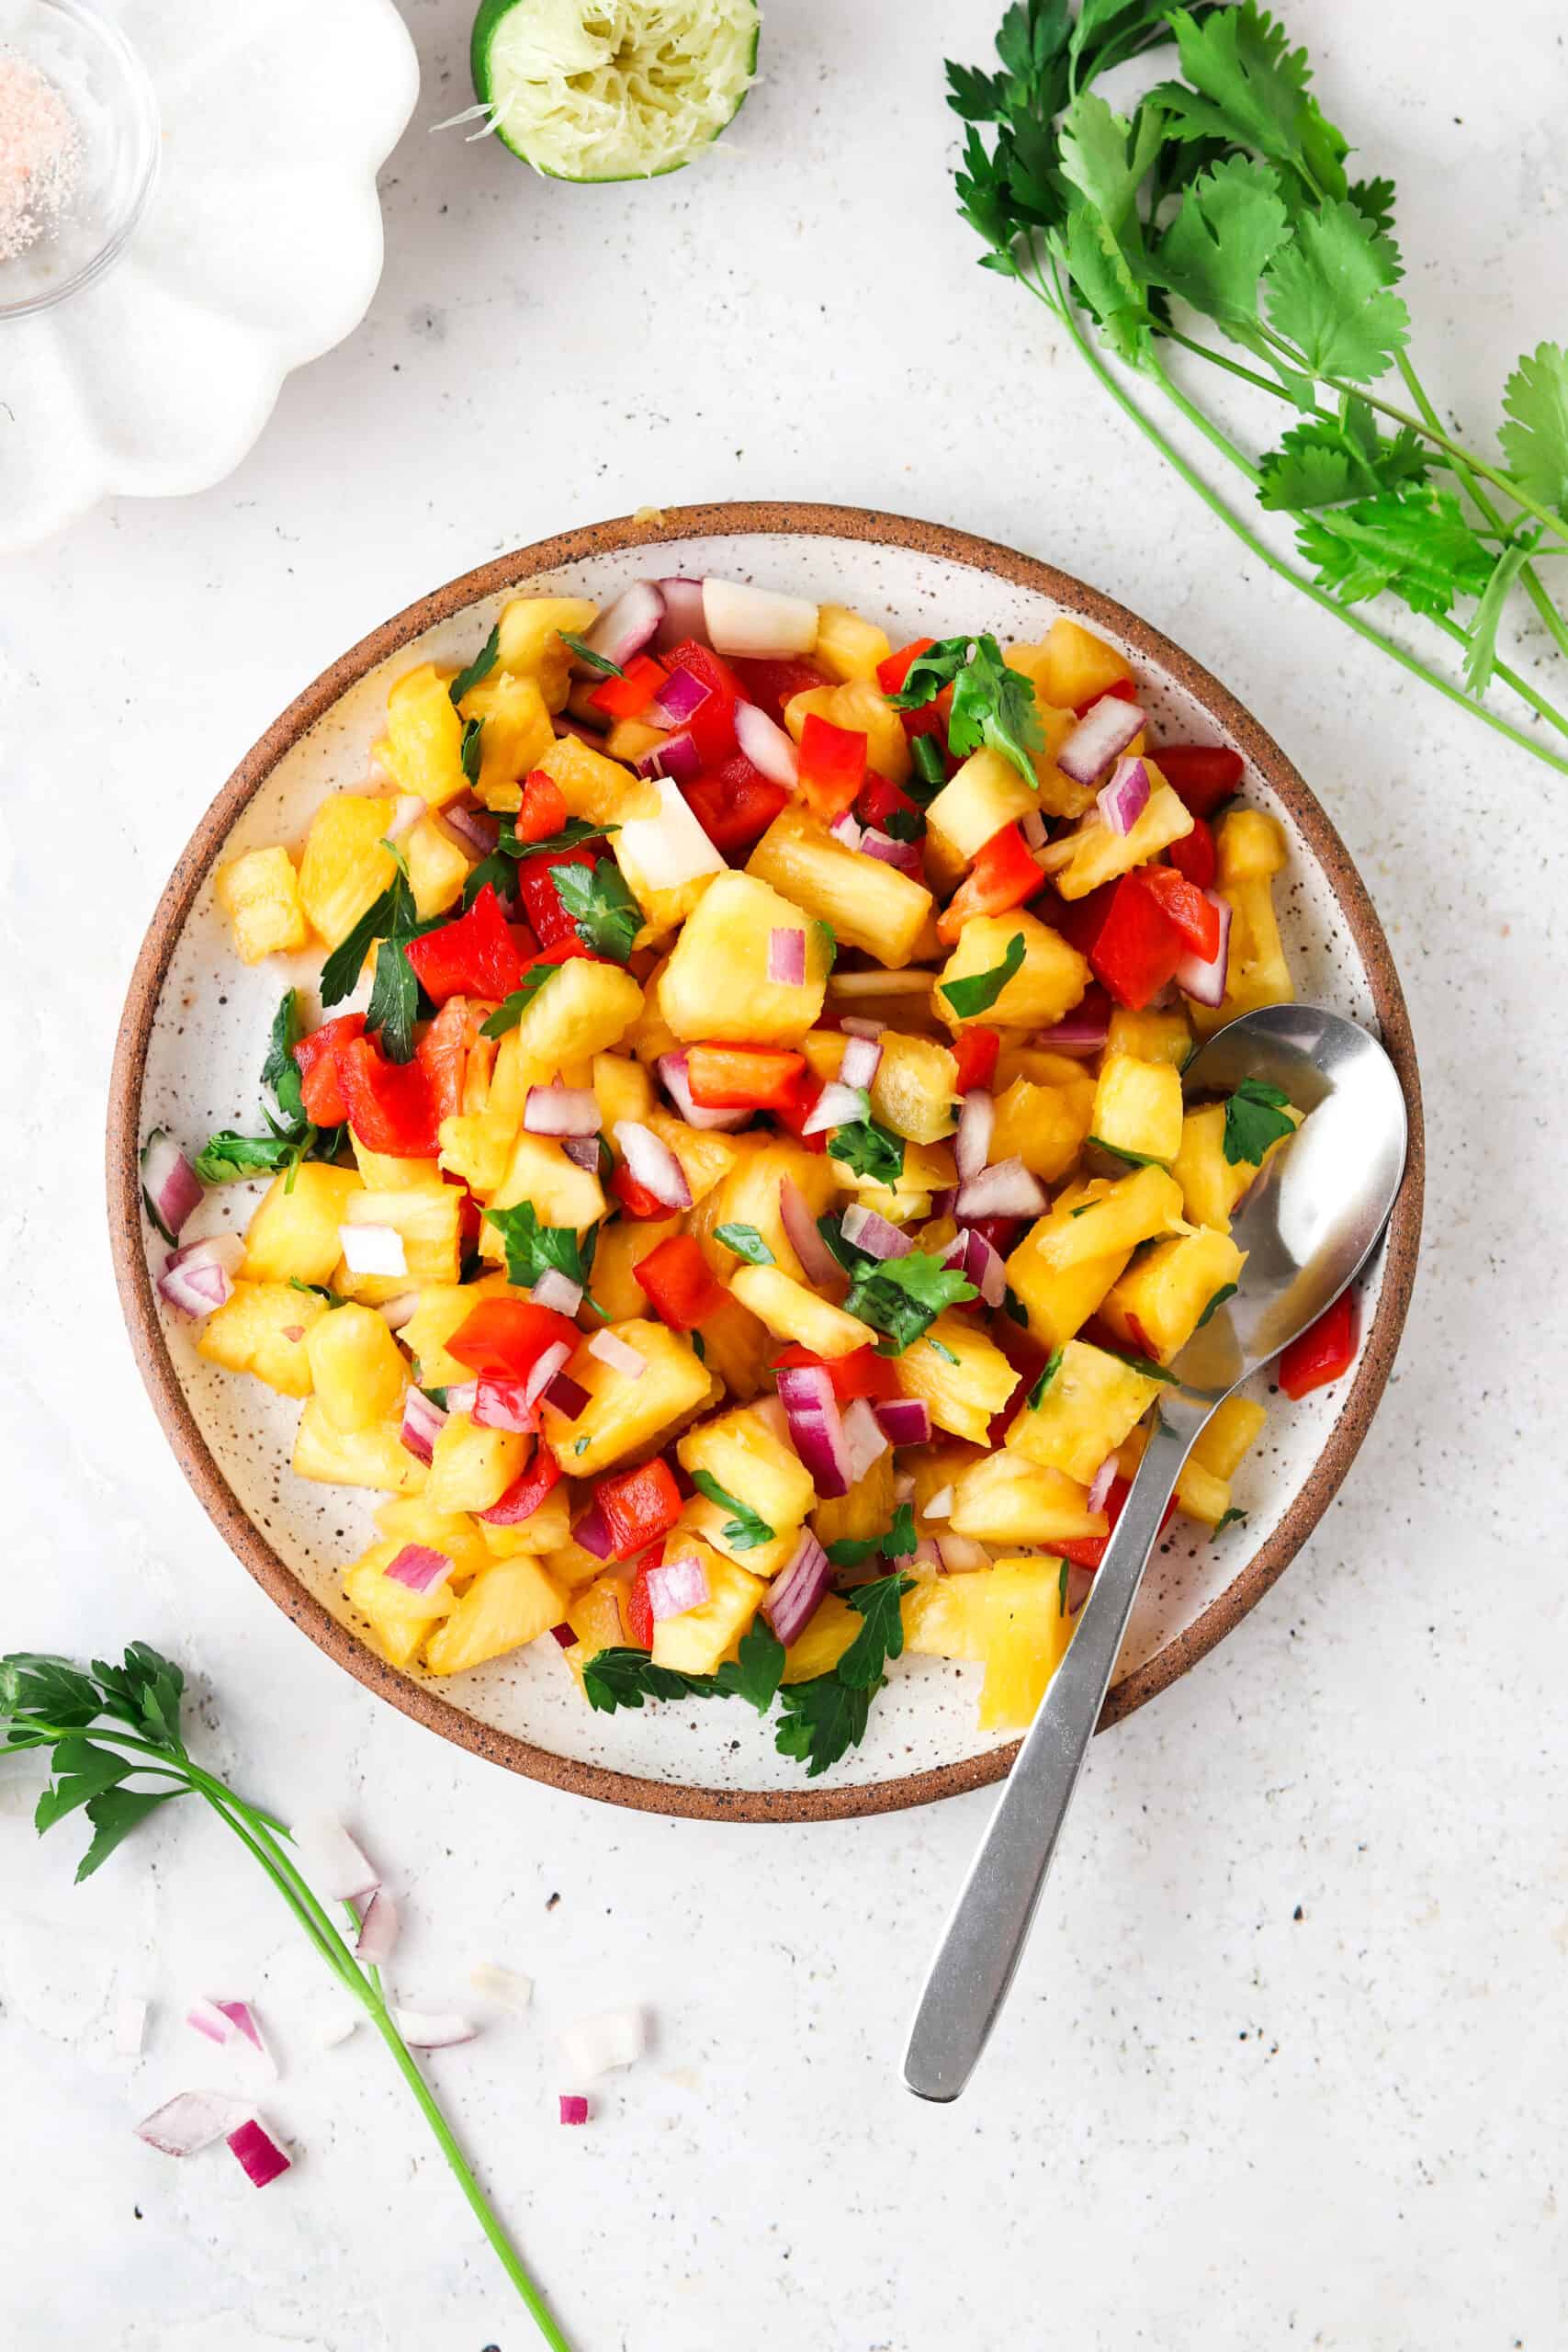 Pineapple pico de gallo on a plate with a silver spoon.